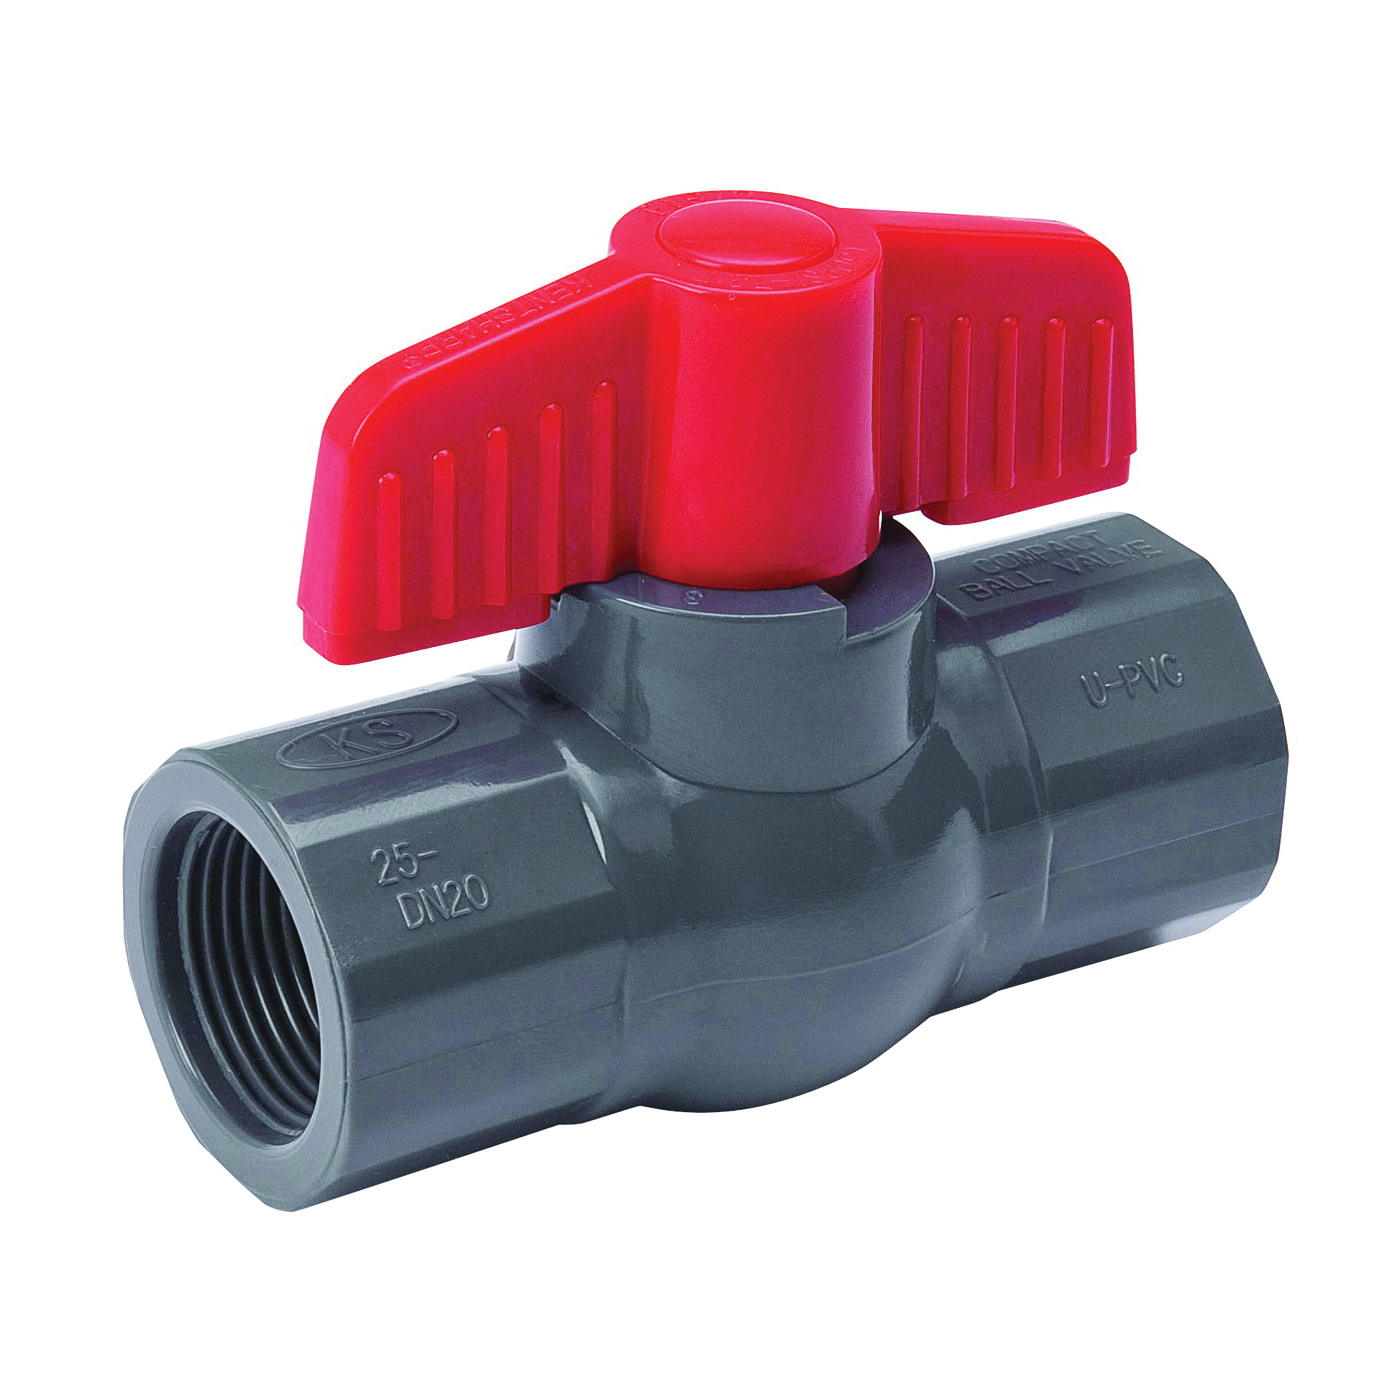 107-108 Ball Valve, 2 in Connection, FPT x FPT, 150 psi Pressure, PVC Body